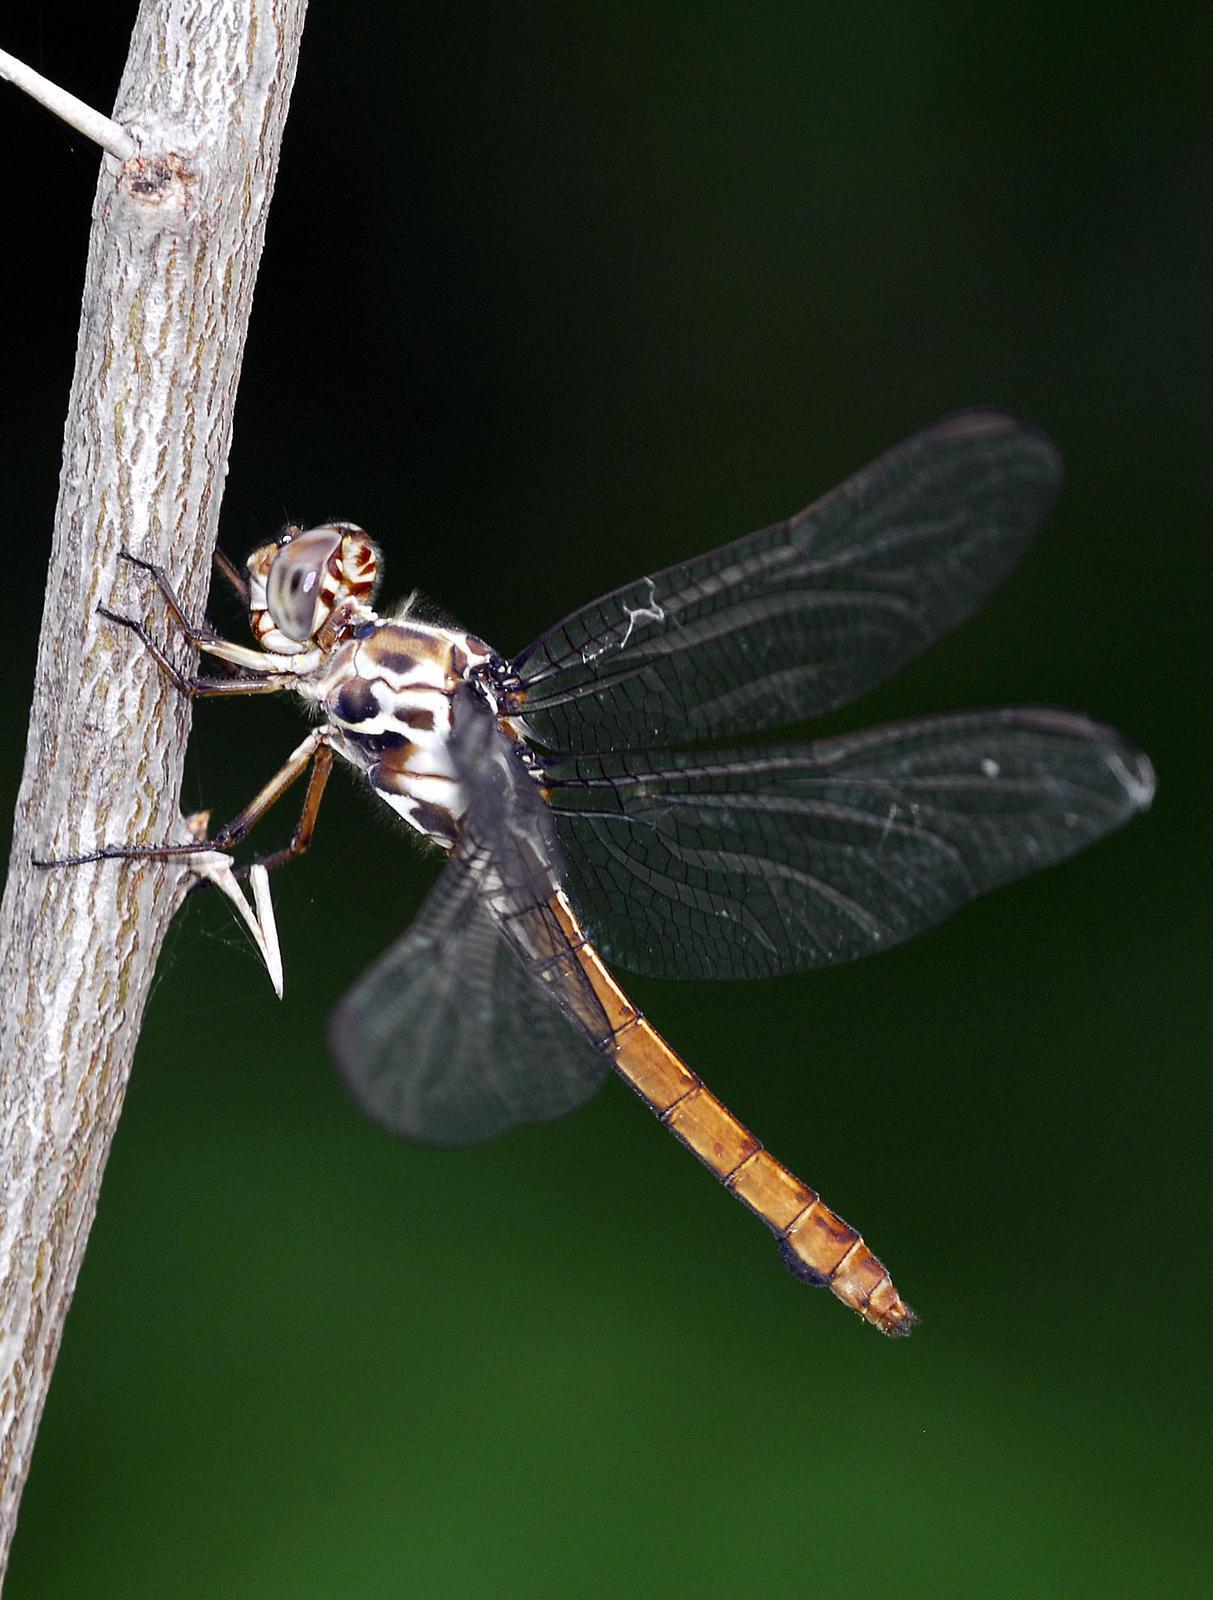 Roseate Skimmer Photo by Robert Behrstock